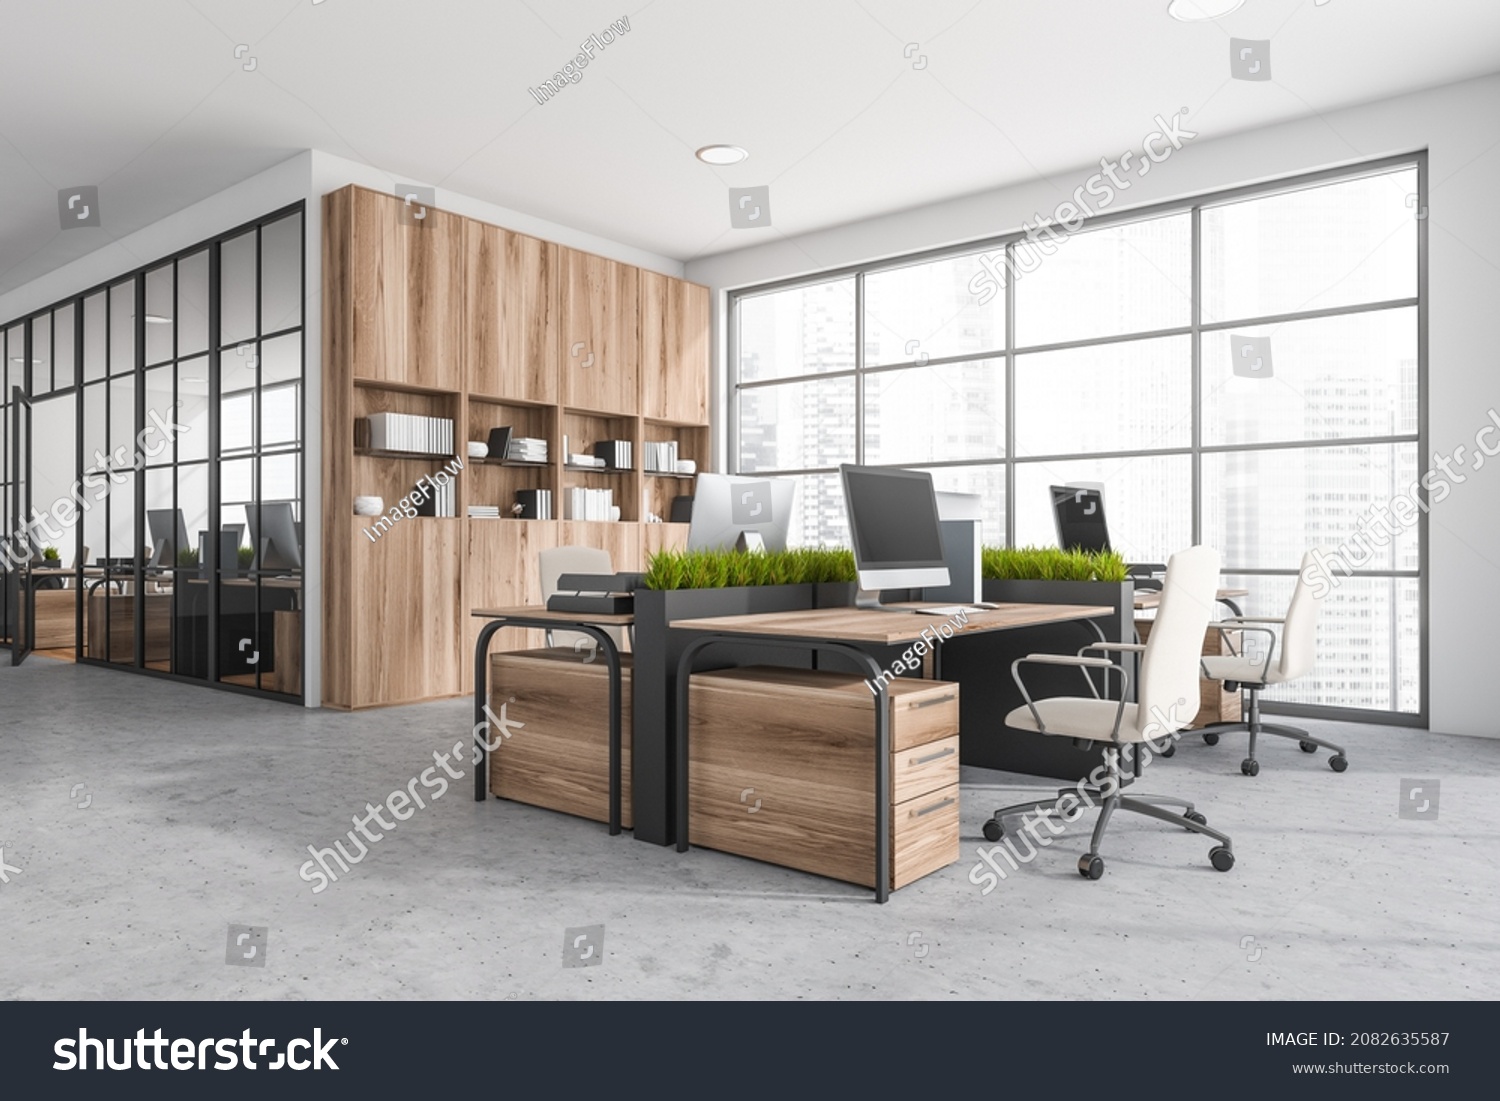 24,964 People at workstation Images, Stock Photos & Vectors | Shutterstock